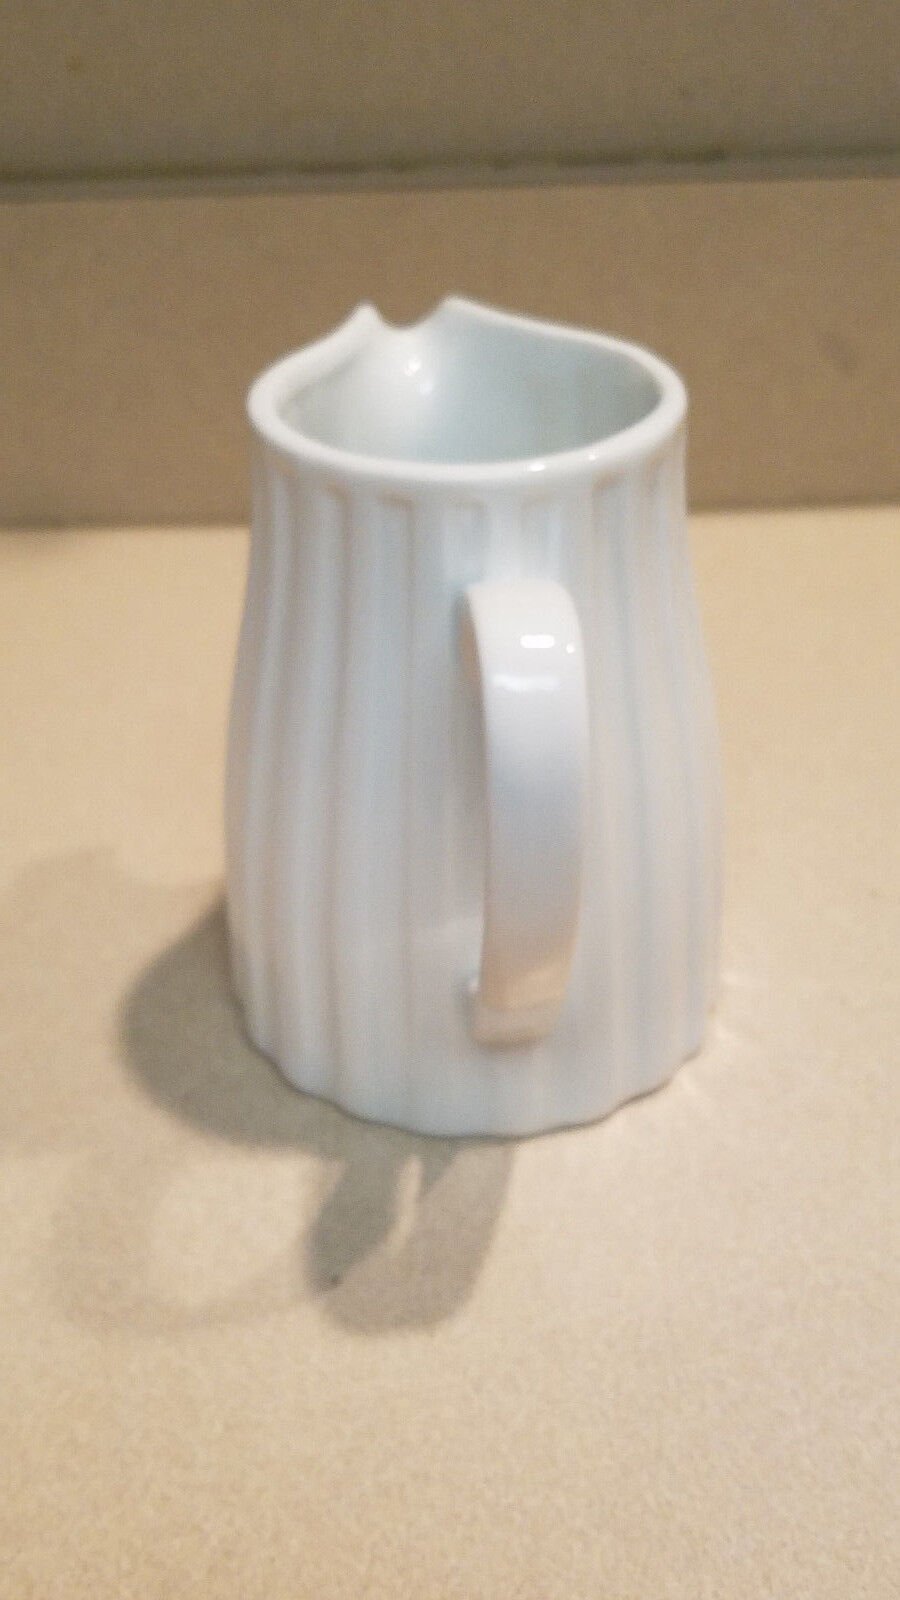 Primary image for Crate & Barrel White Embedded Ribbed Design 5" Pitcher #572-144 (NEW)